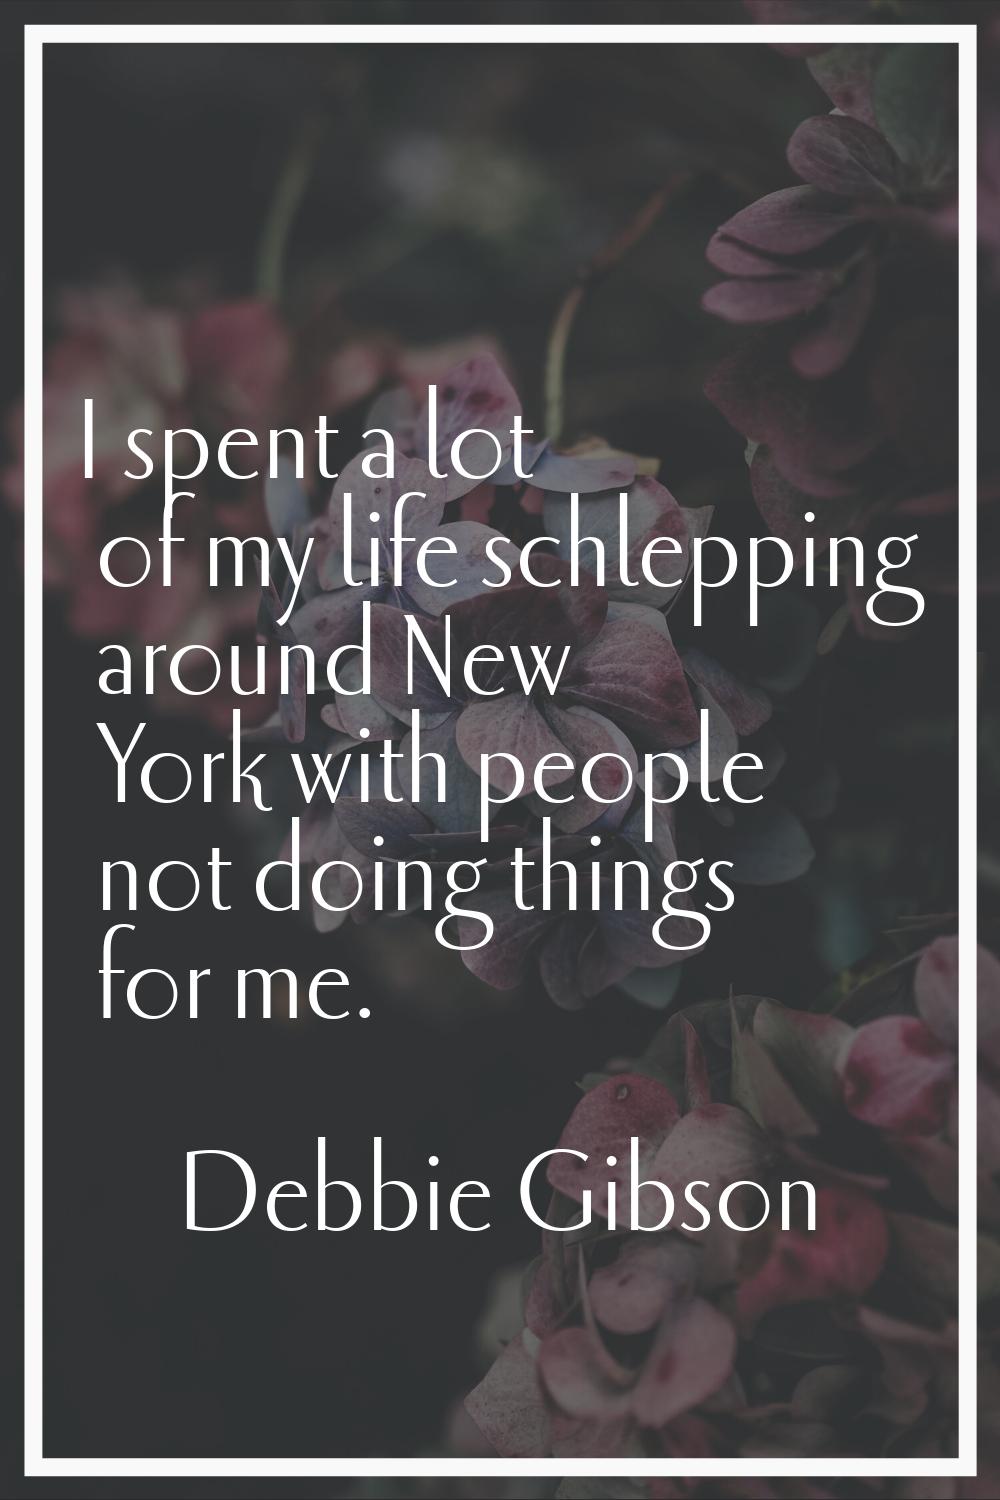 I spent a lot of my life schlepping around New York with people not doing things for me.